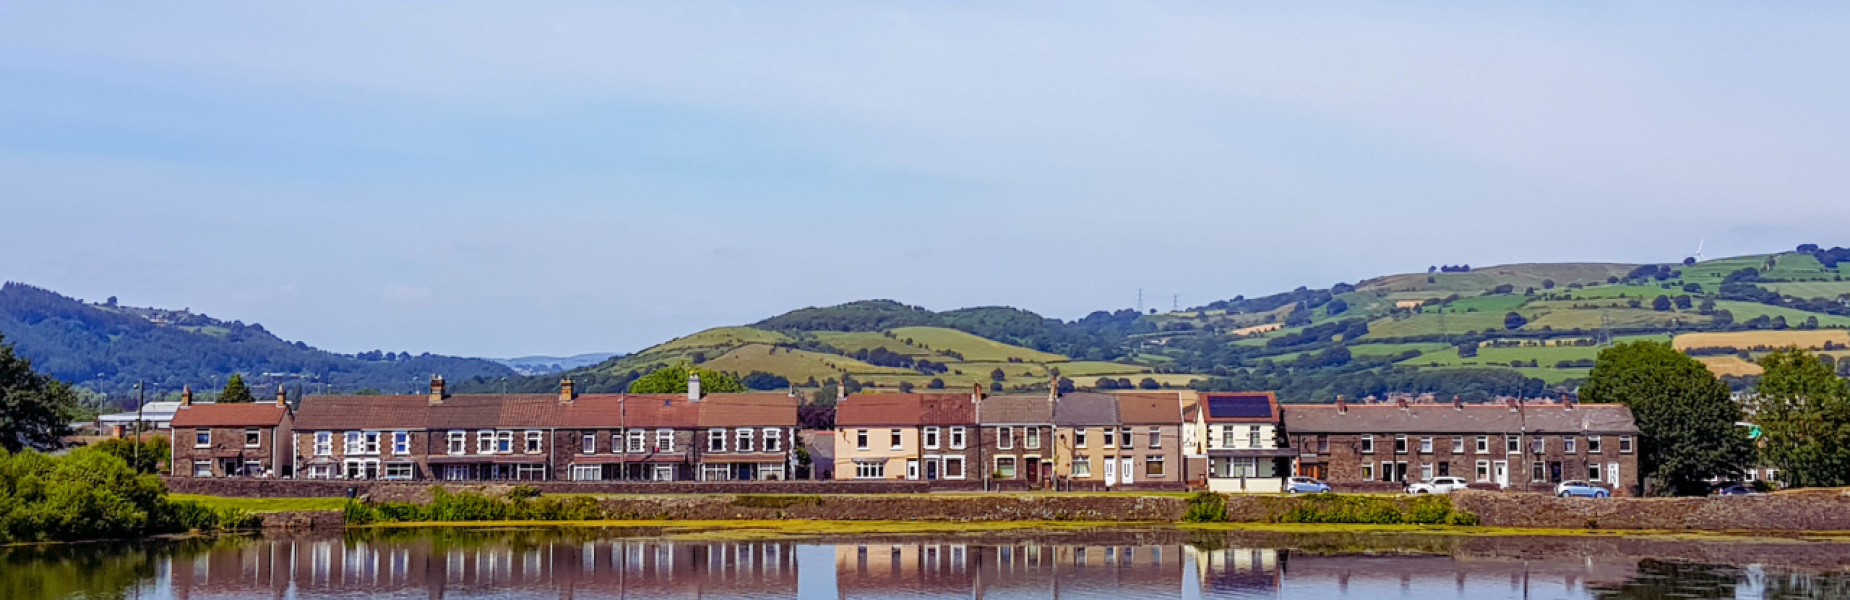 a picture of a row of houses in Caerphilly